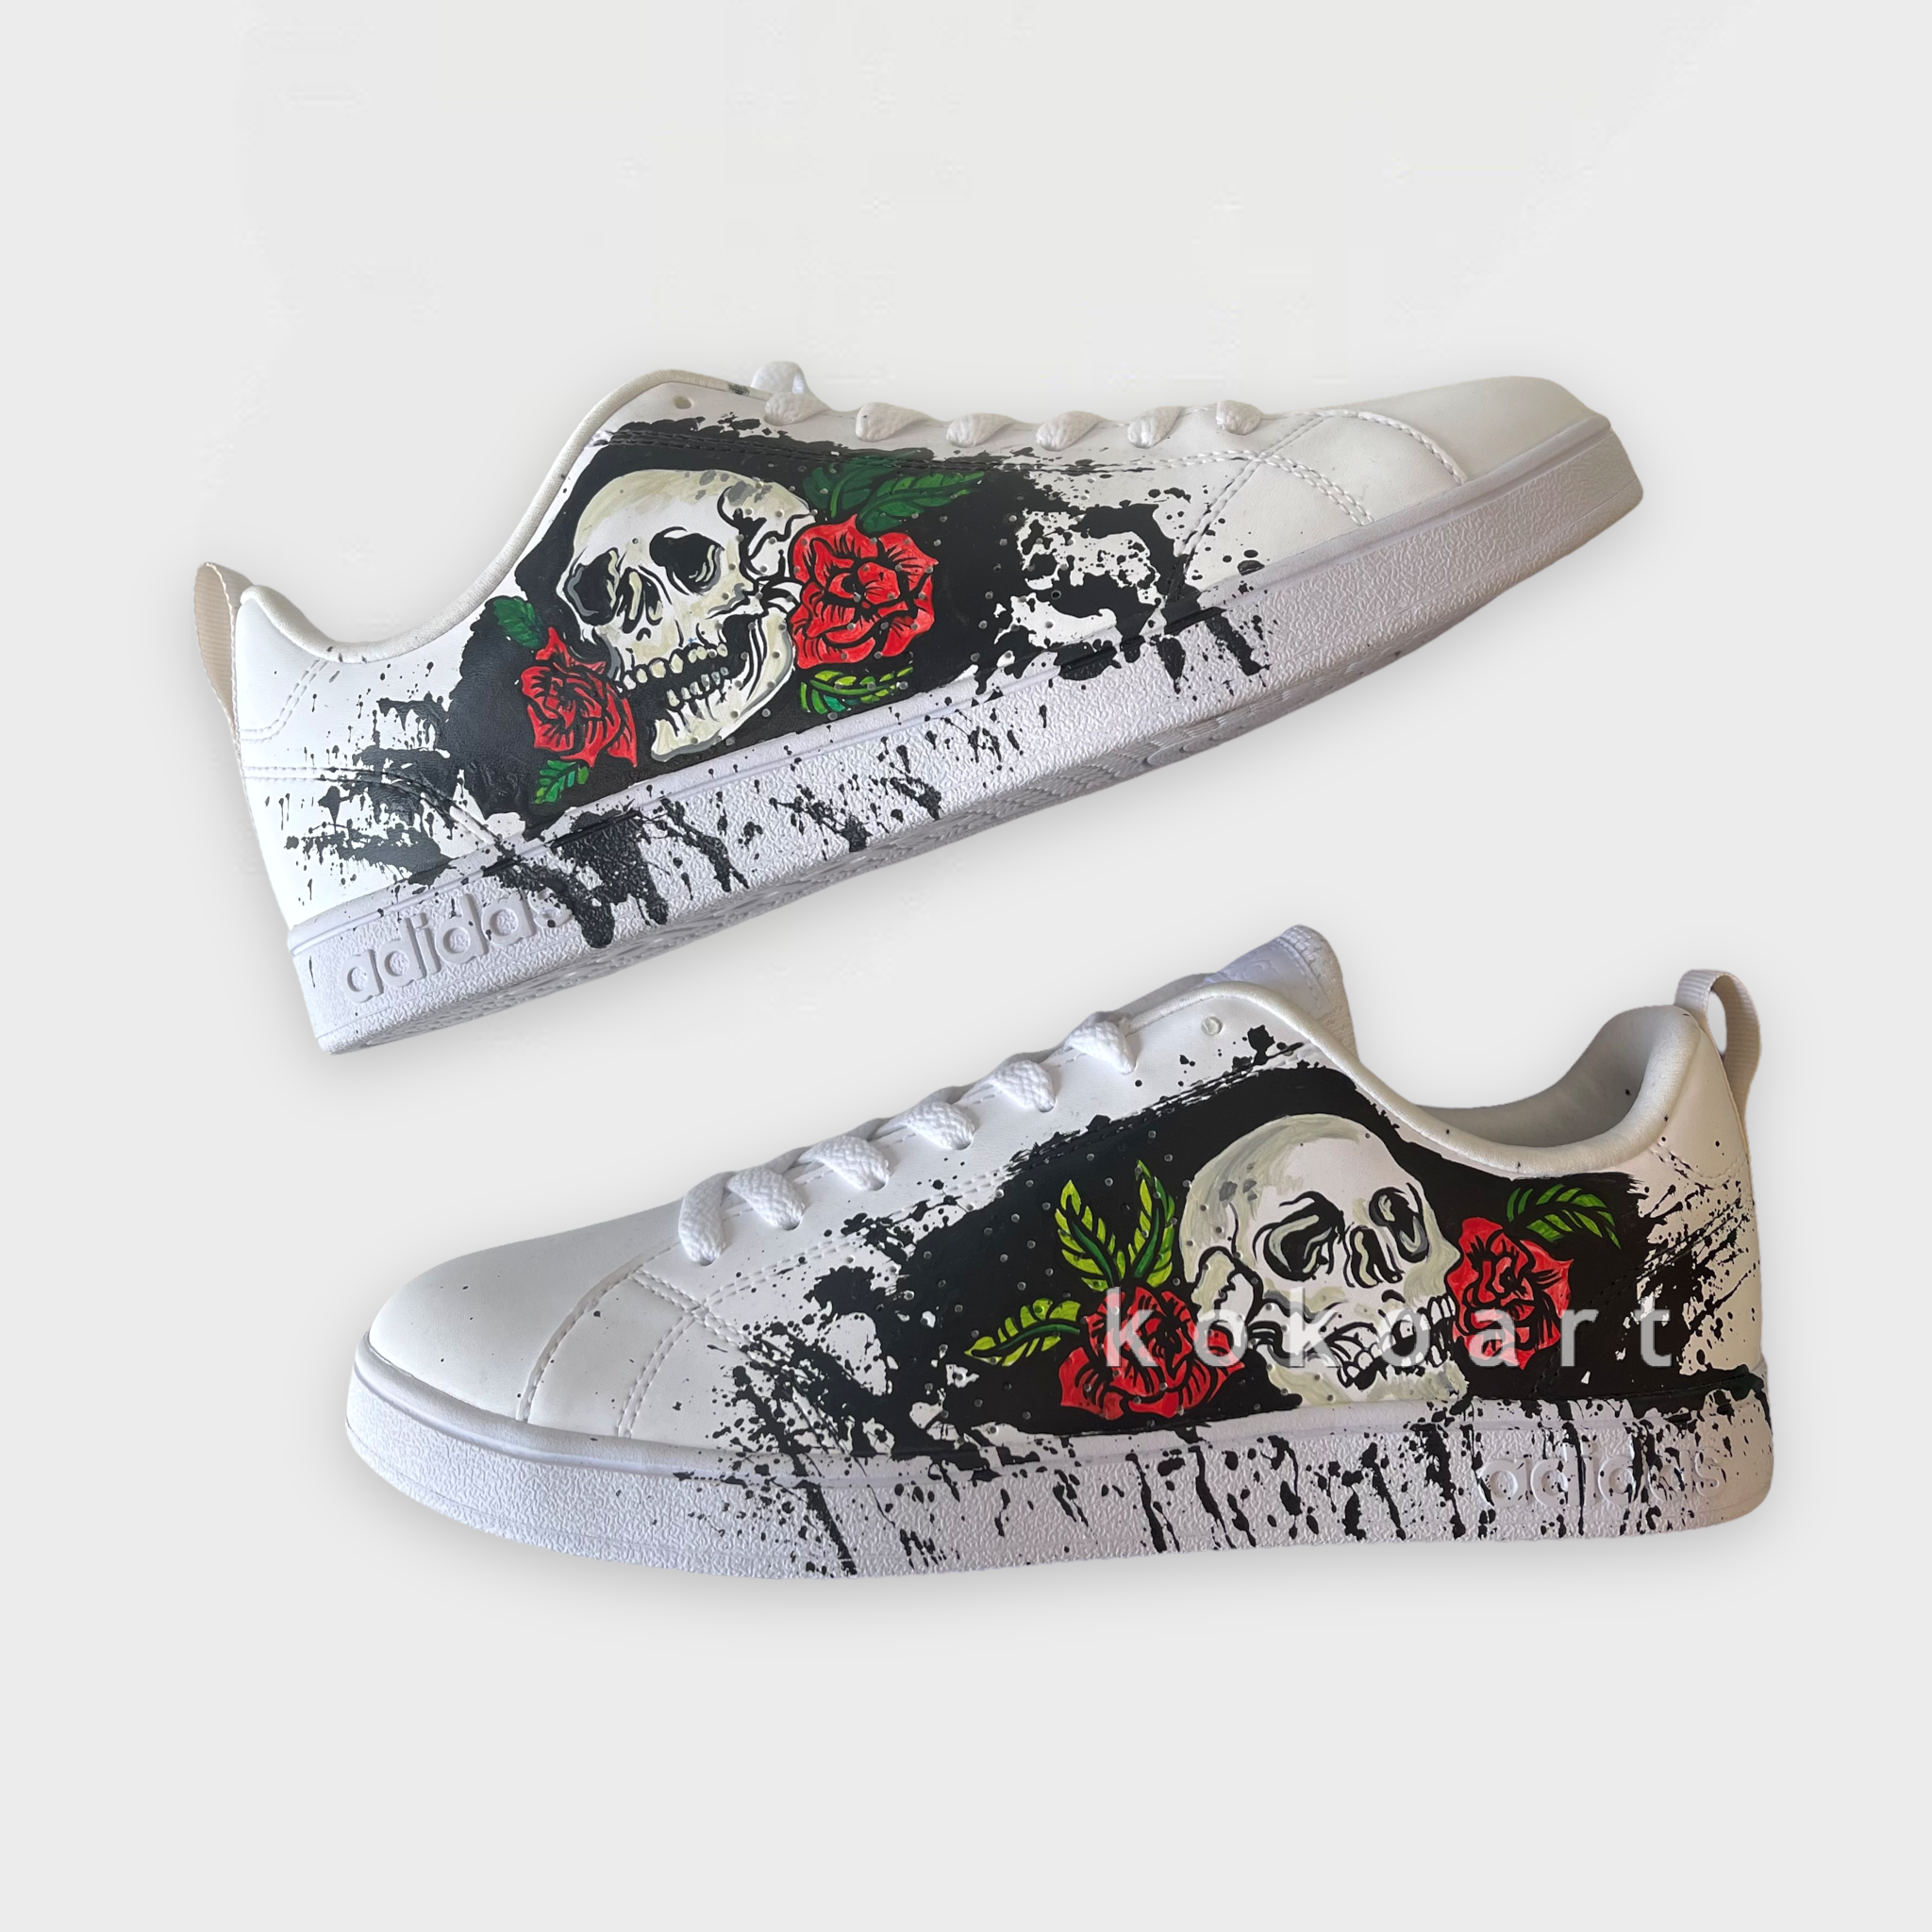 Stan Smith Hand Painted Skull